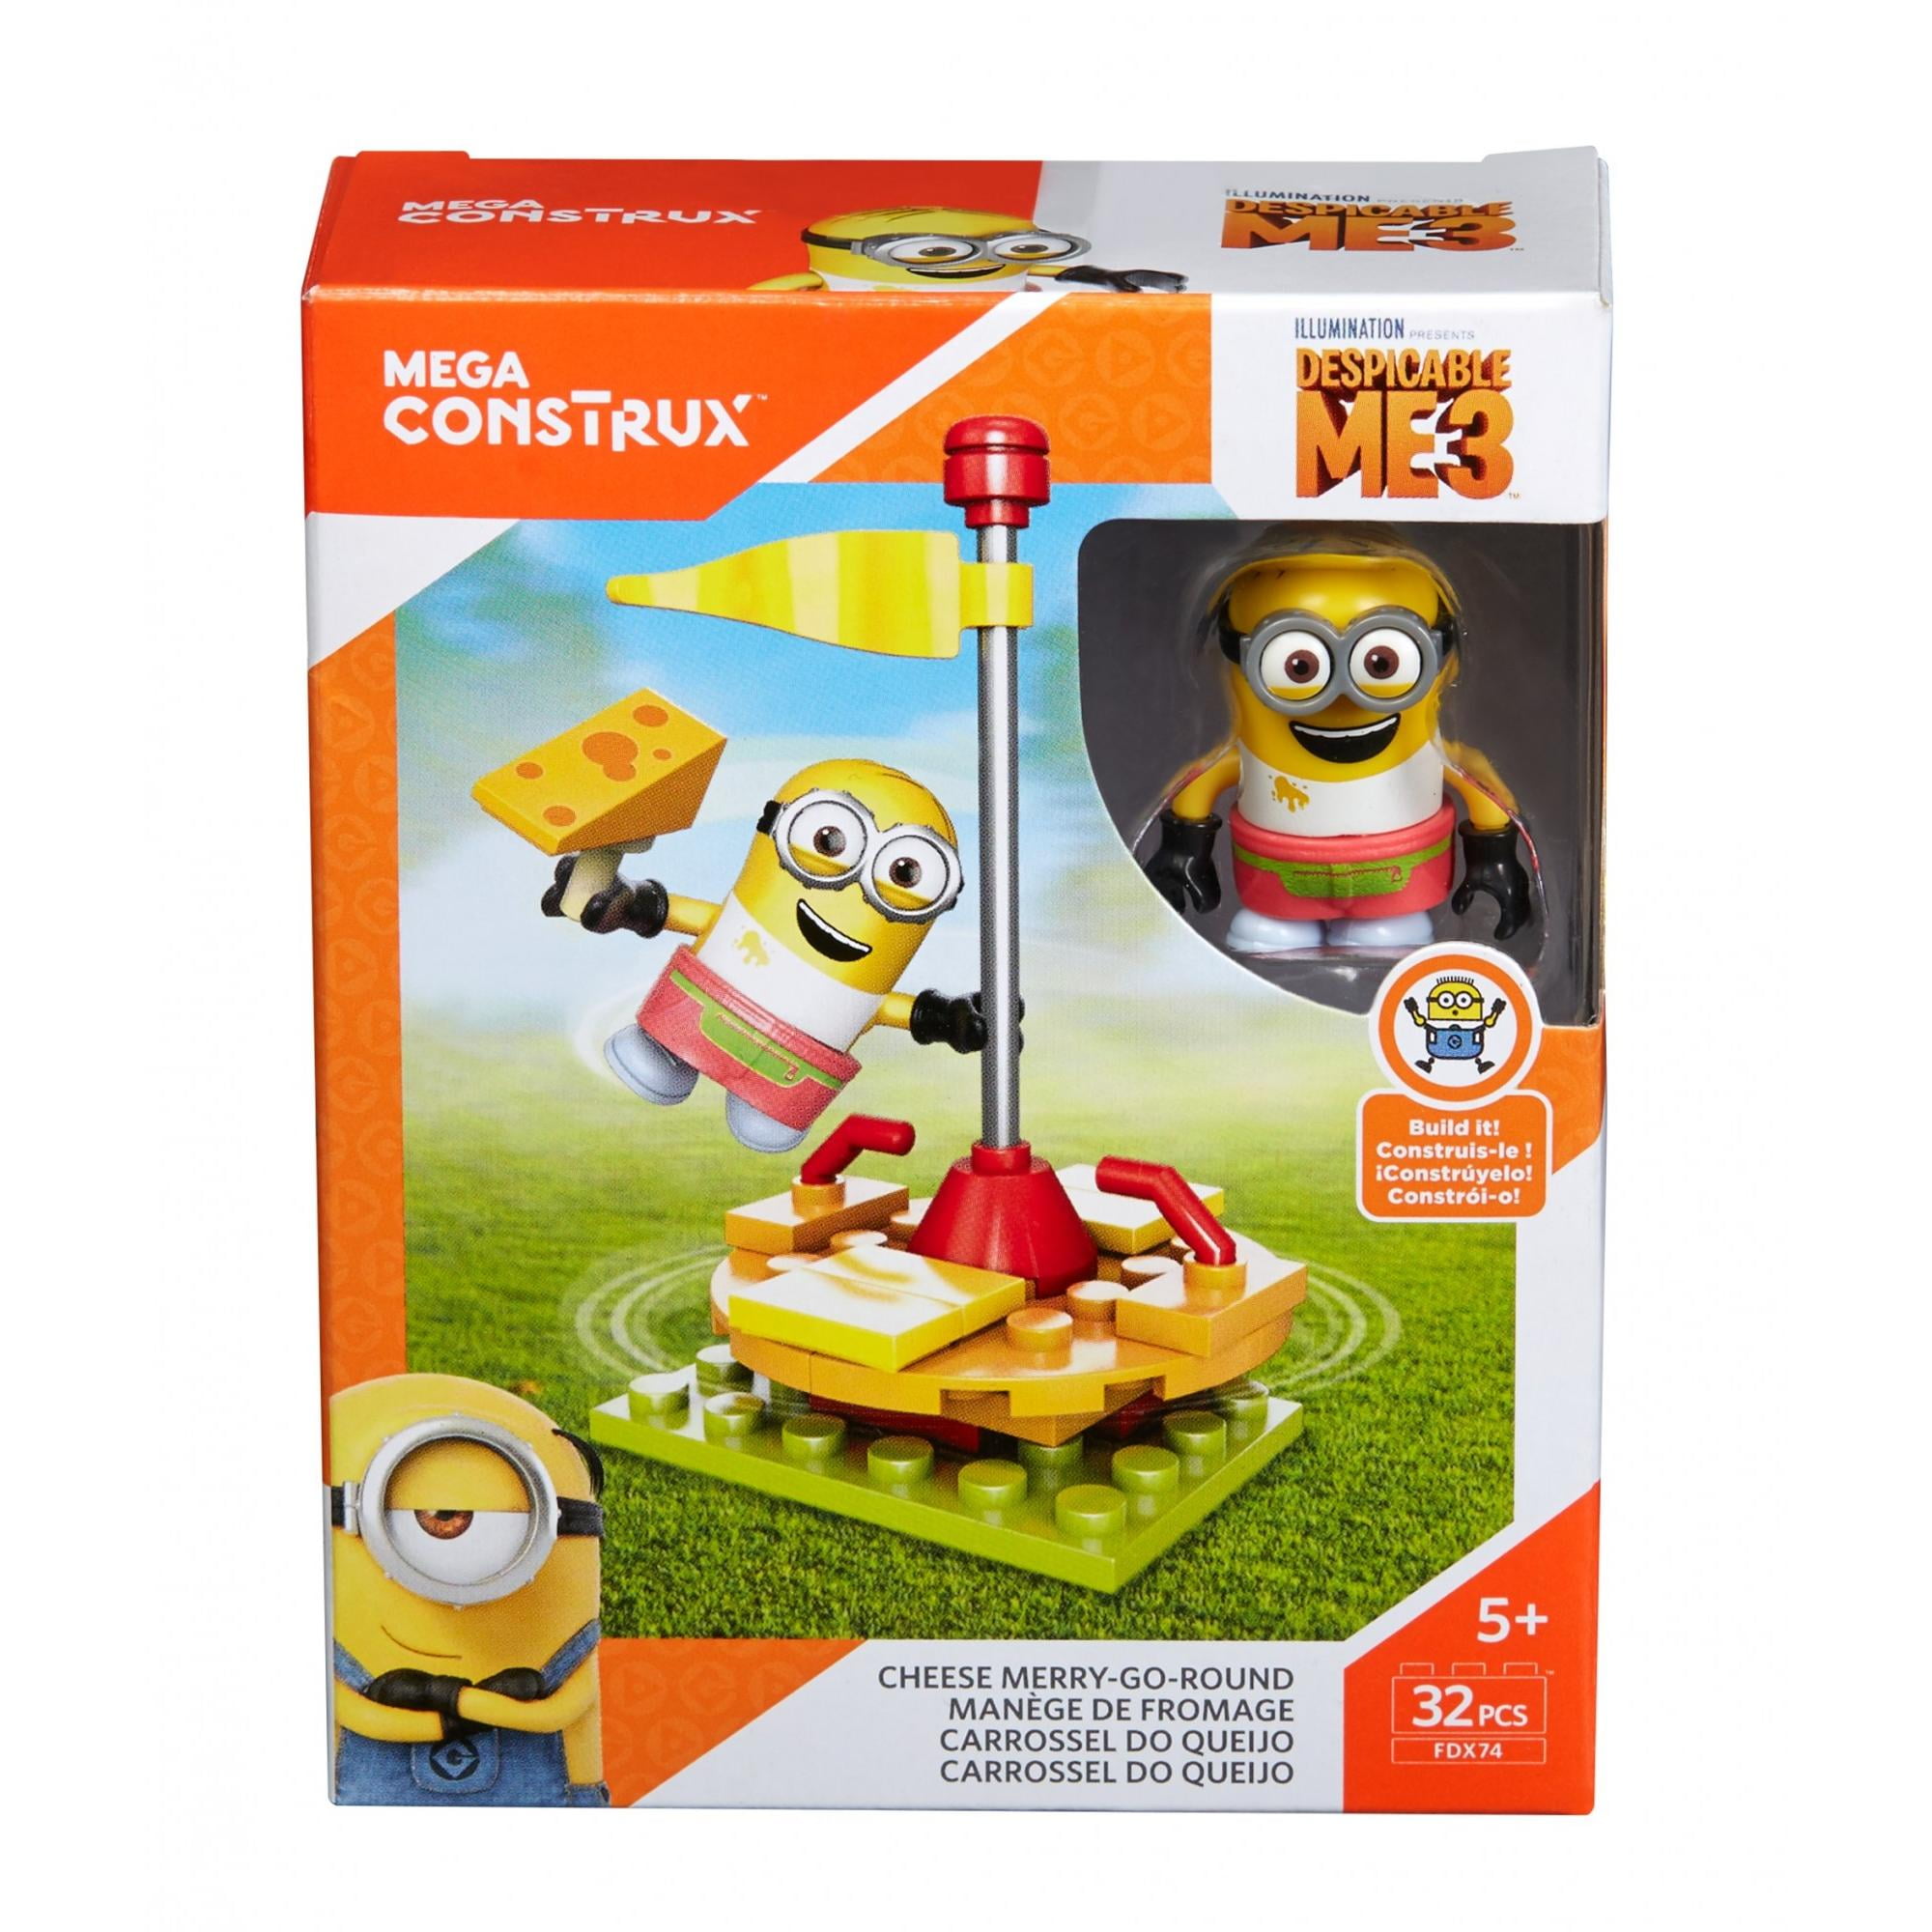 Mega Construx Despicable Me 3 Cheese Merry Go Round for sale online 